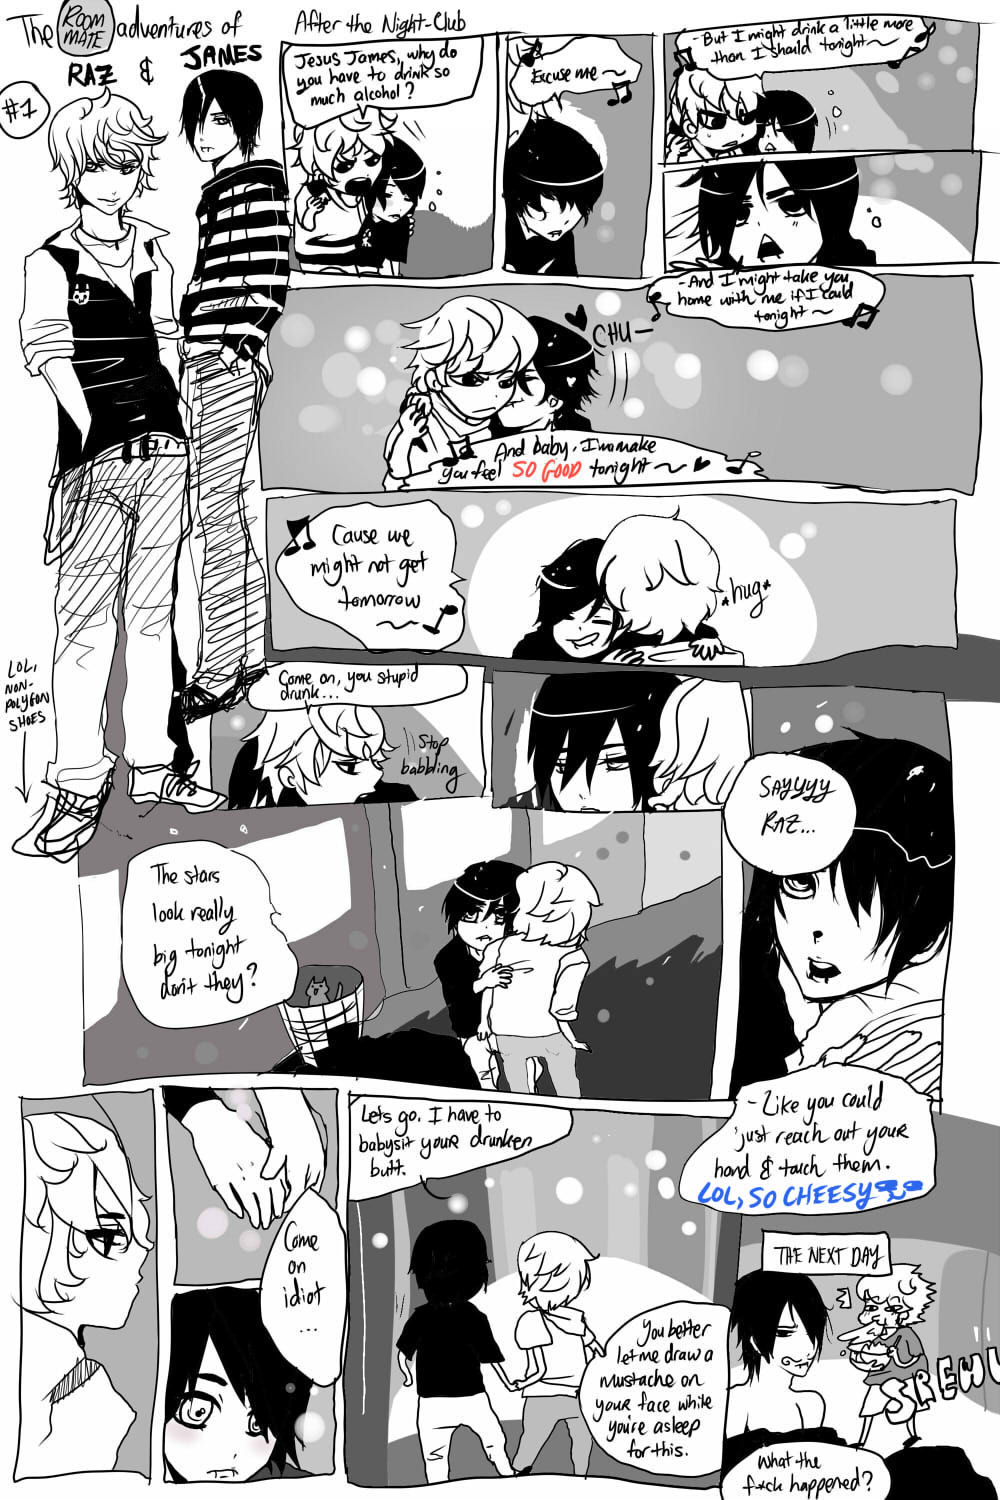 Roommie Adventures #1: After the Night Club by luckylace222